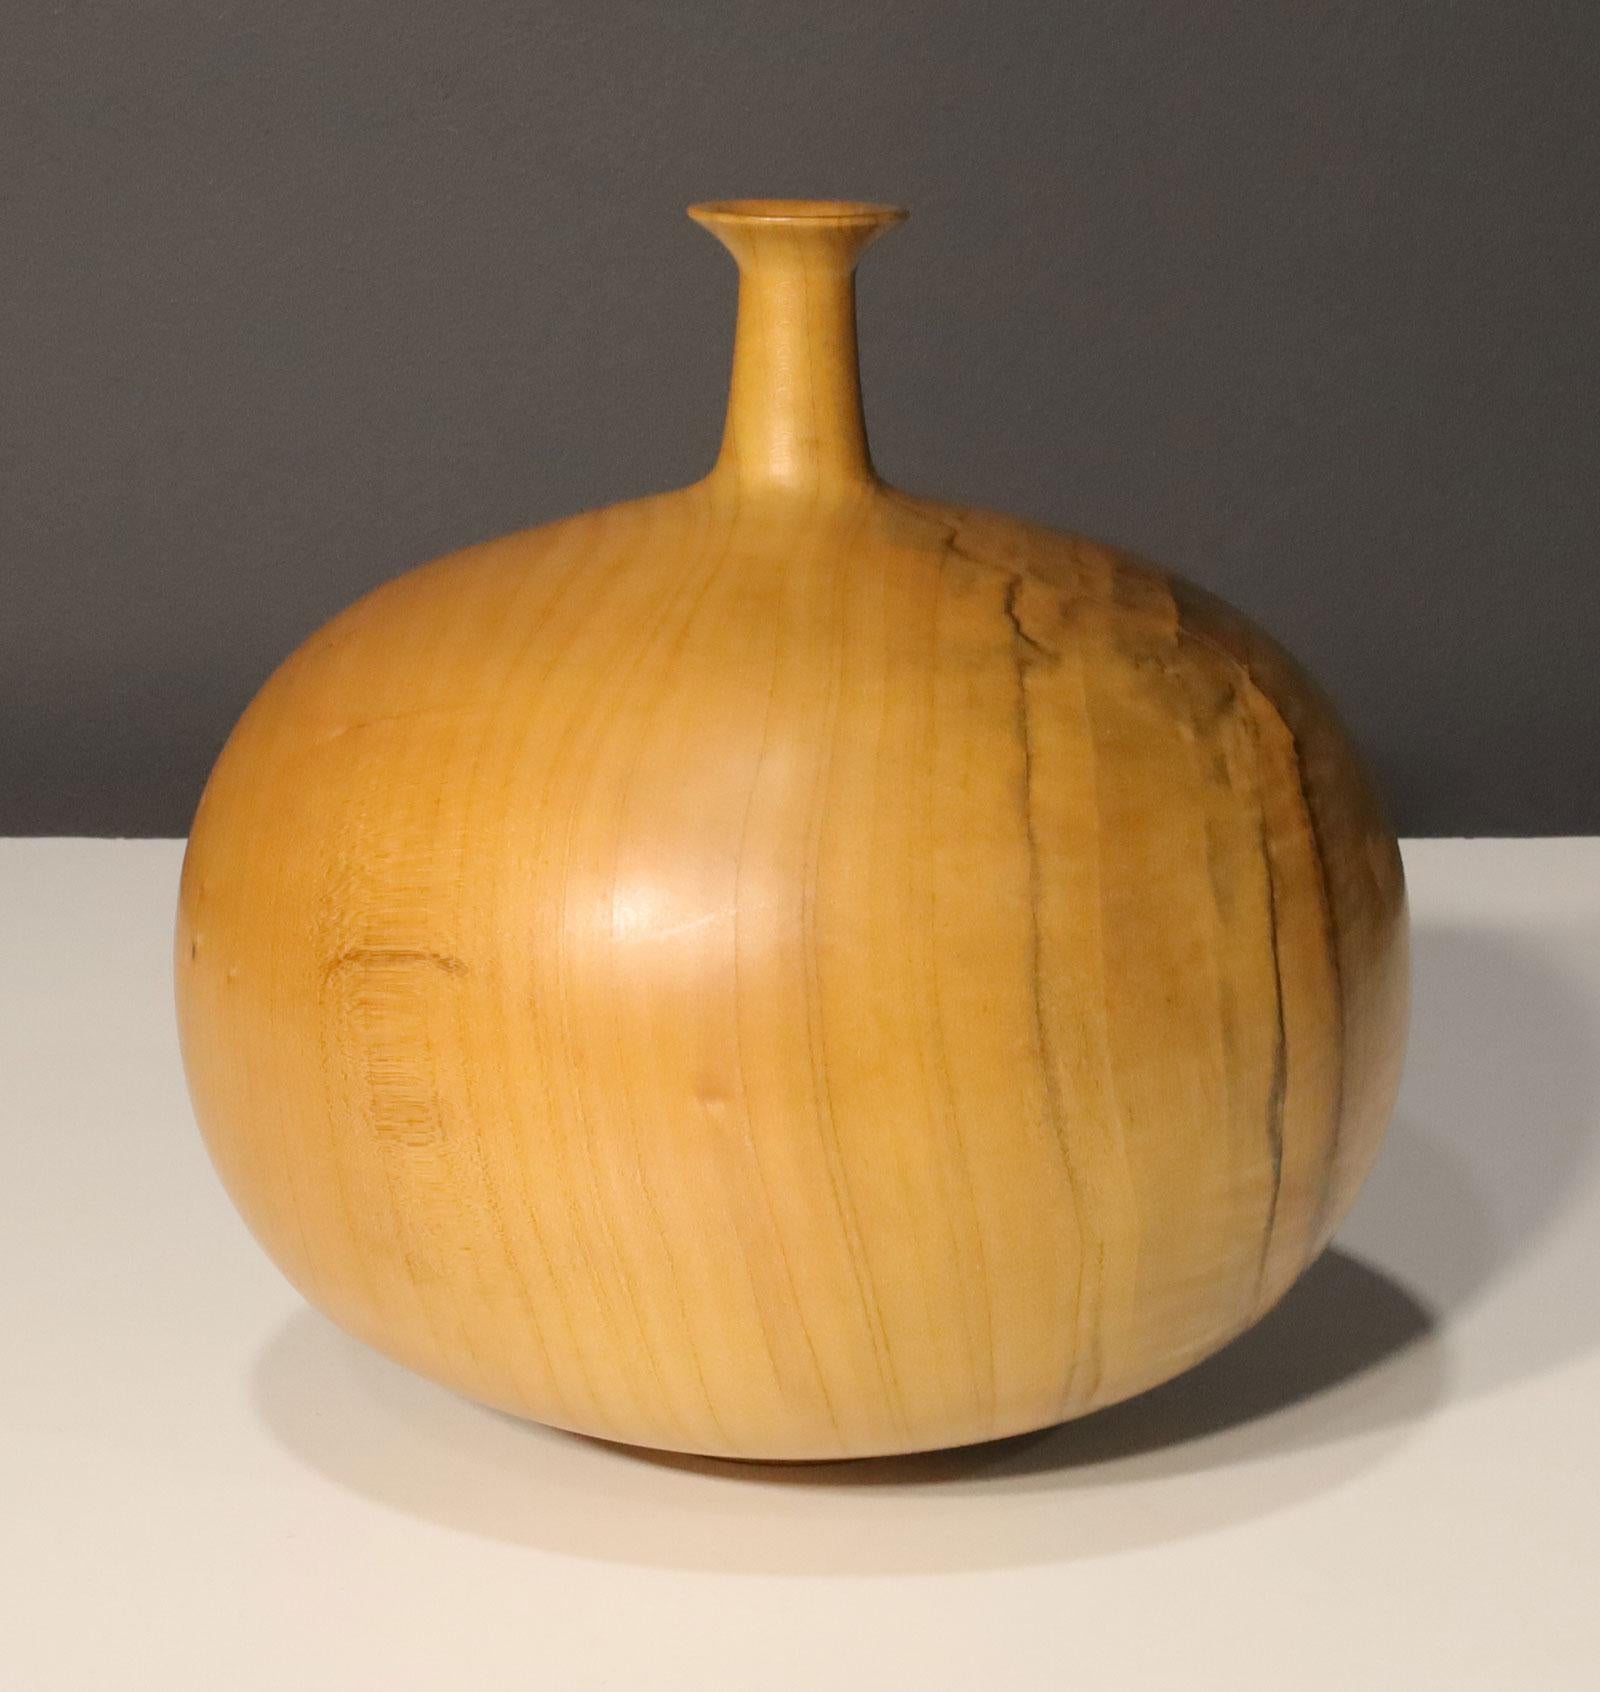 John Jordan (b. 1950) lives in Tennessee and has been a woodturner for more than thirty years. He has done demonstrations for and given hands-on lessons to thousands of woodturners in most states in the US, as well as ten other countries. The turned